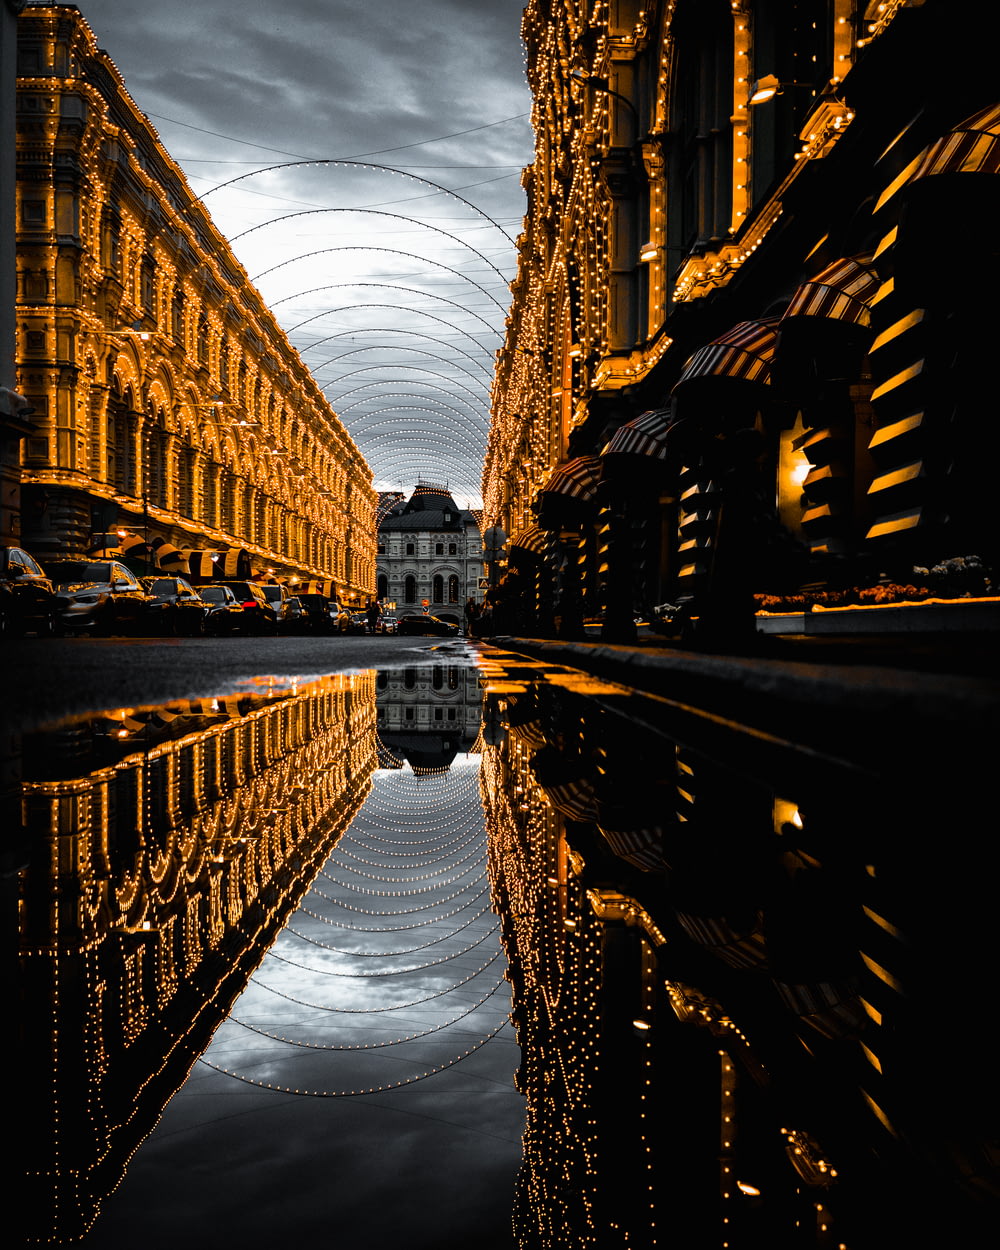 water on asphalt road with reflection of fully-decorated buildings under cloudy sky